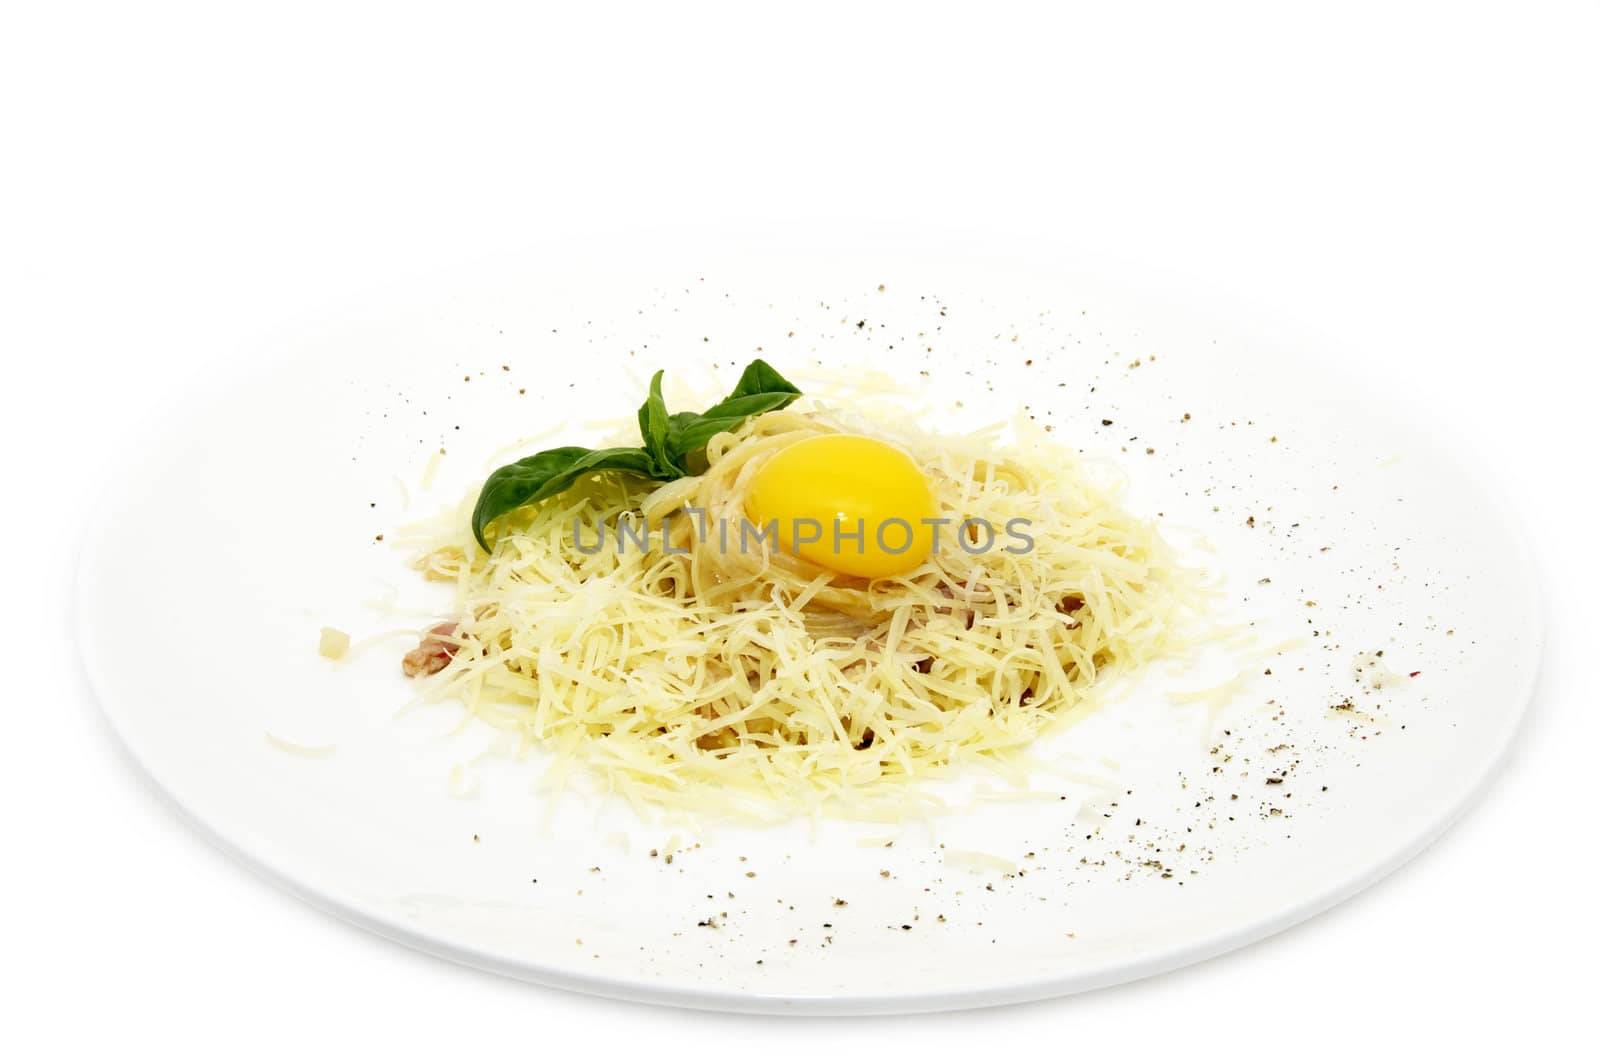 spaghetti with egg on a plate on a white background